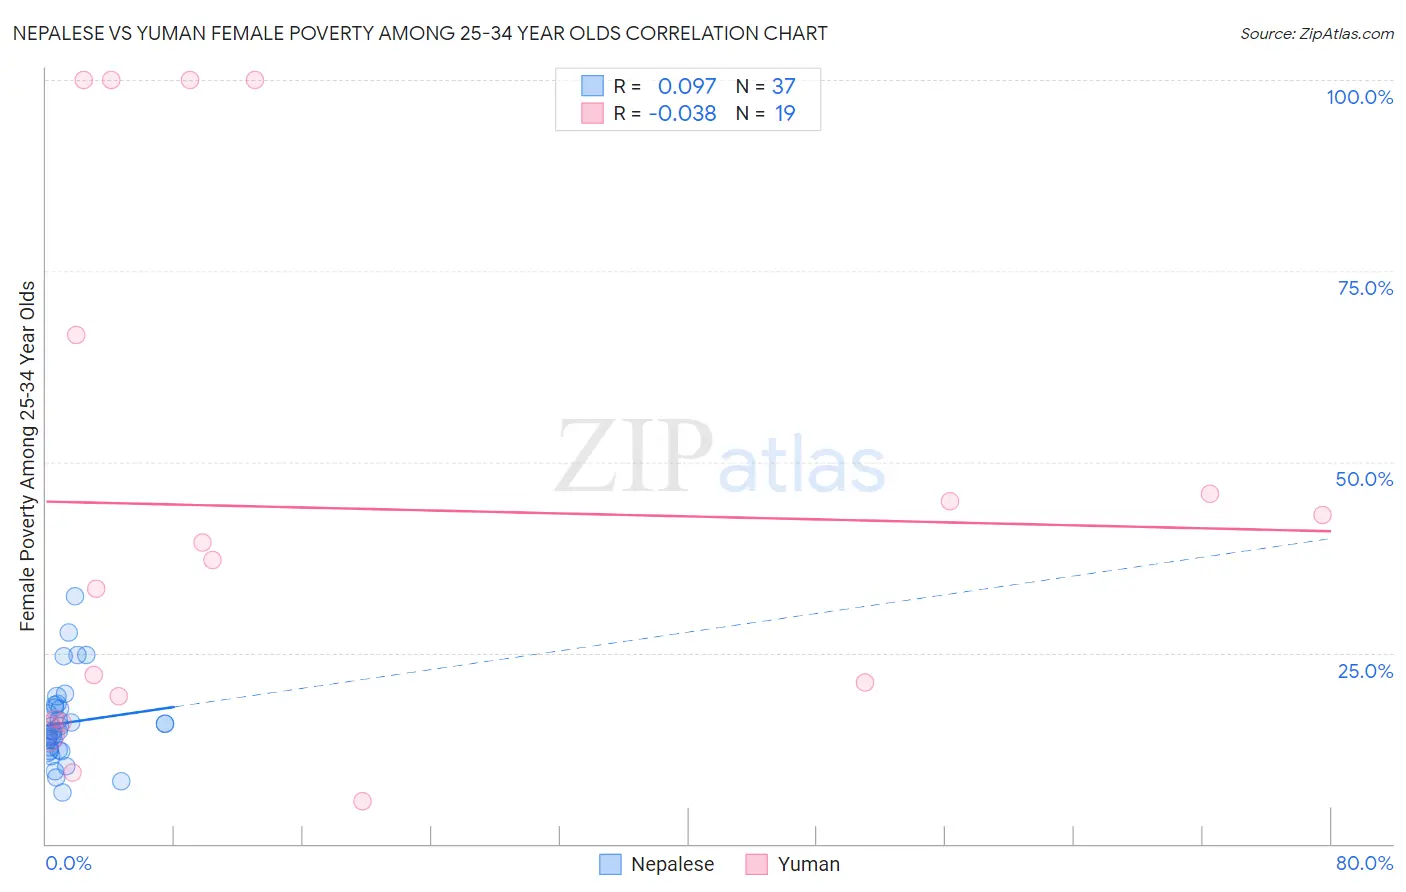 Nepalese vs Yuman Female Poverty Among 25-34 Year Olds